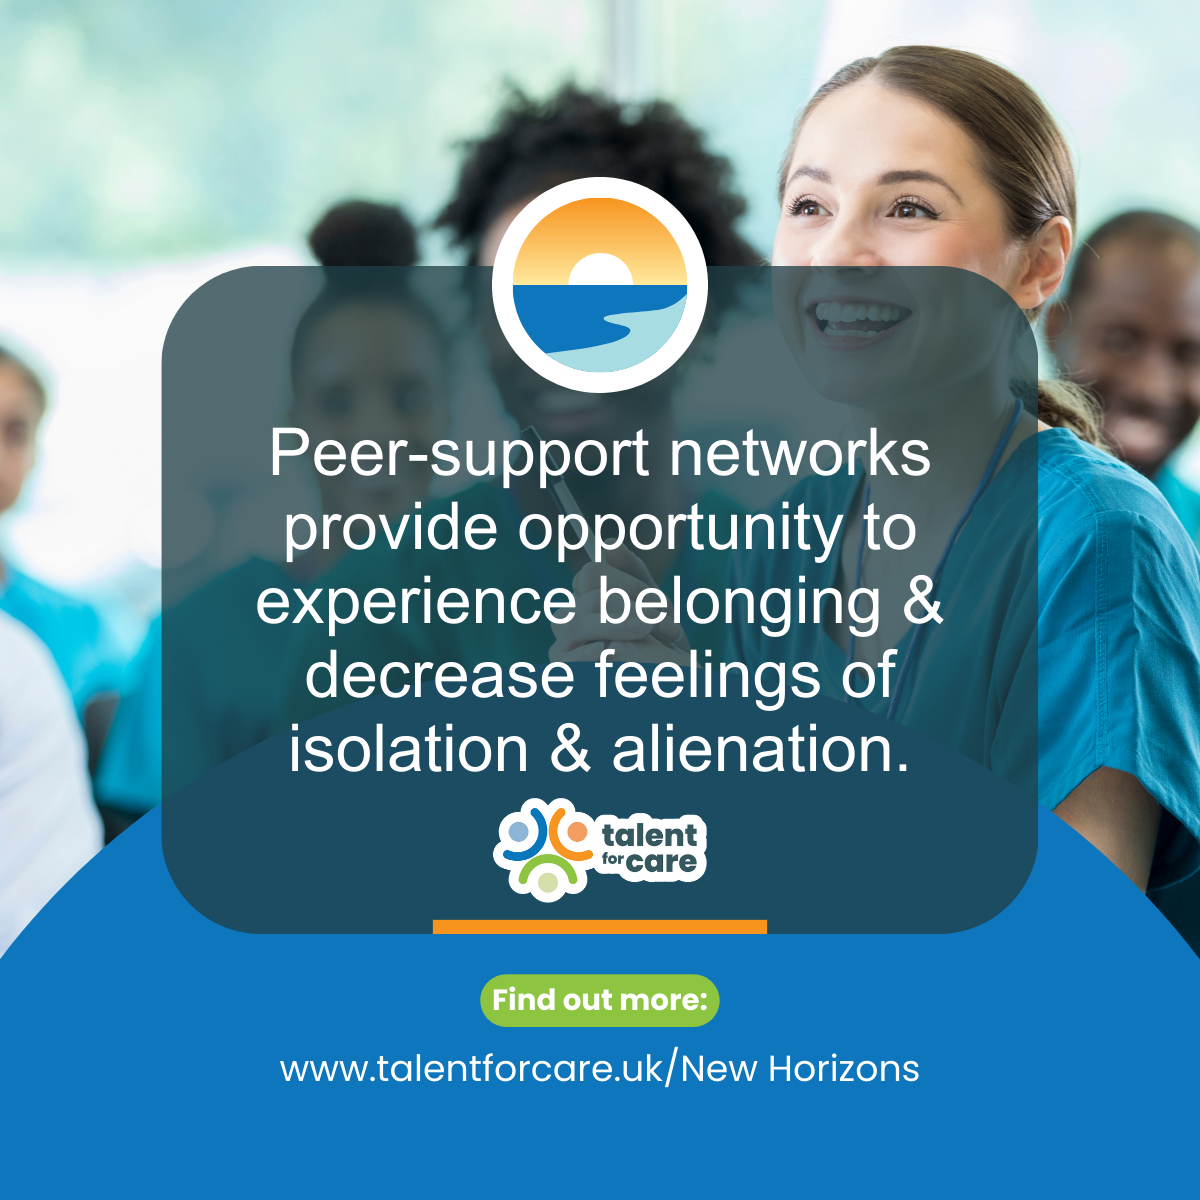 Peer-support networks provide opportunity to experience belonging & decrease feelings of isolation & alienation